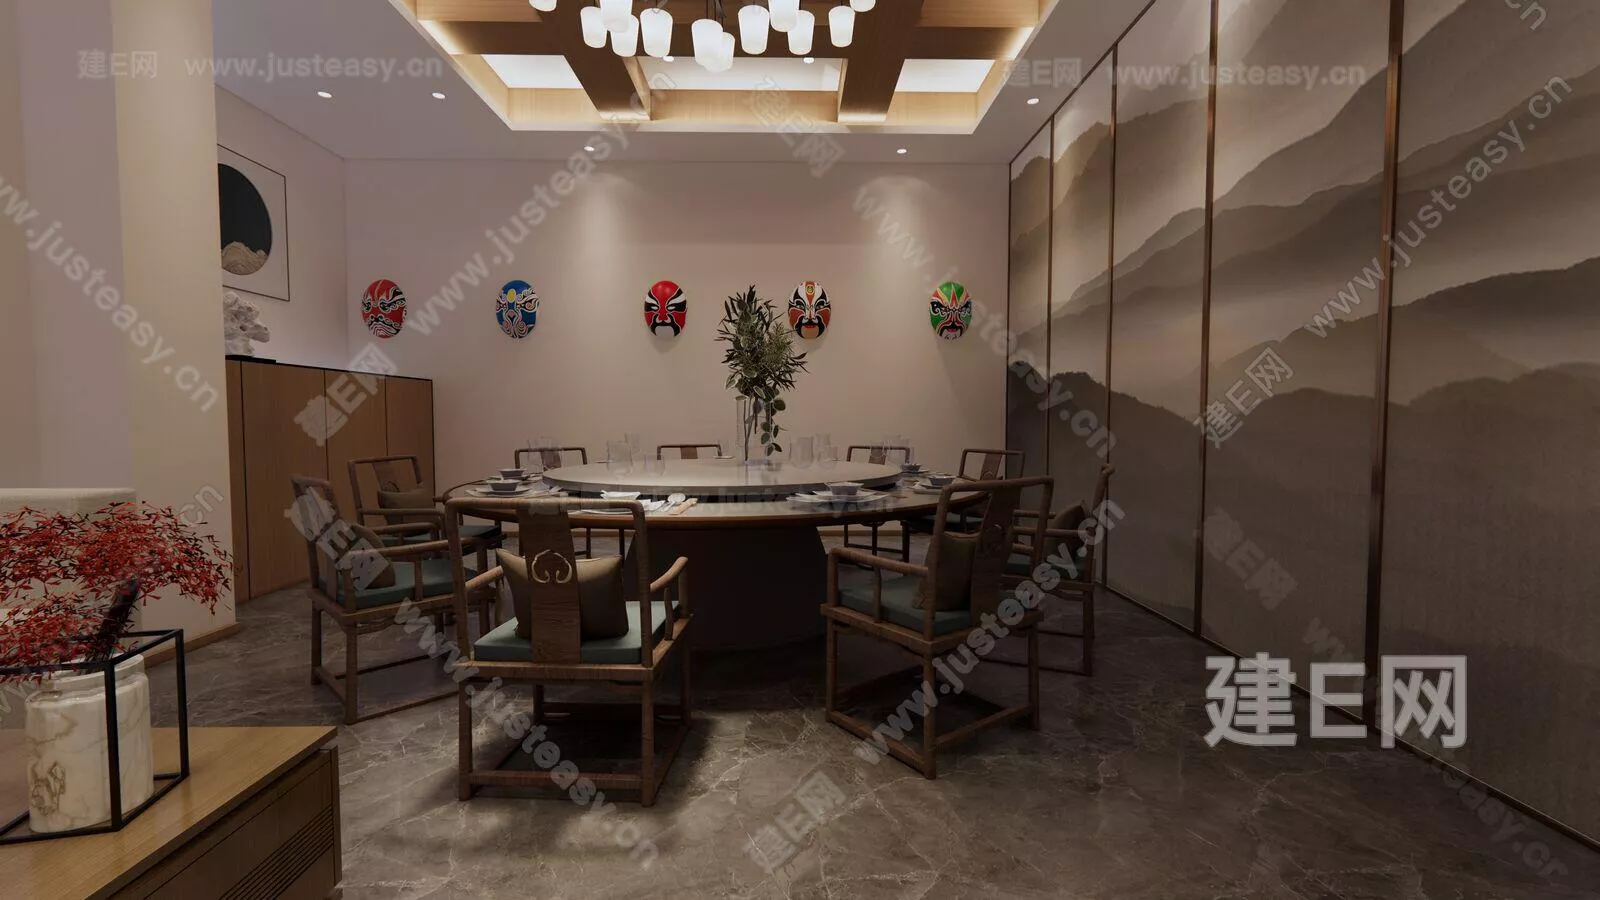 CHINESE DINING ROOM - SKETCHUP 3D SCENE - ENSCAPE - 100812040